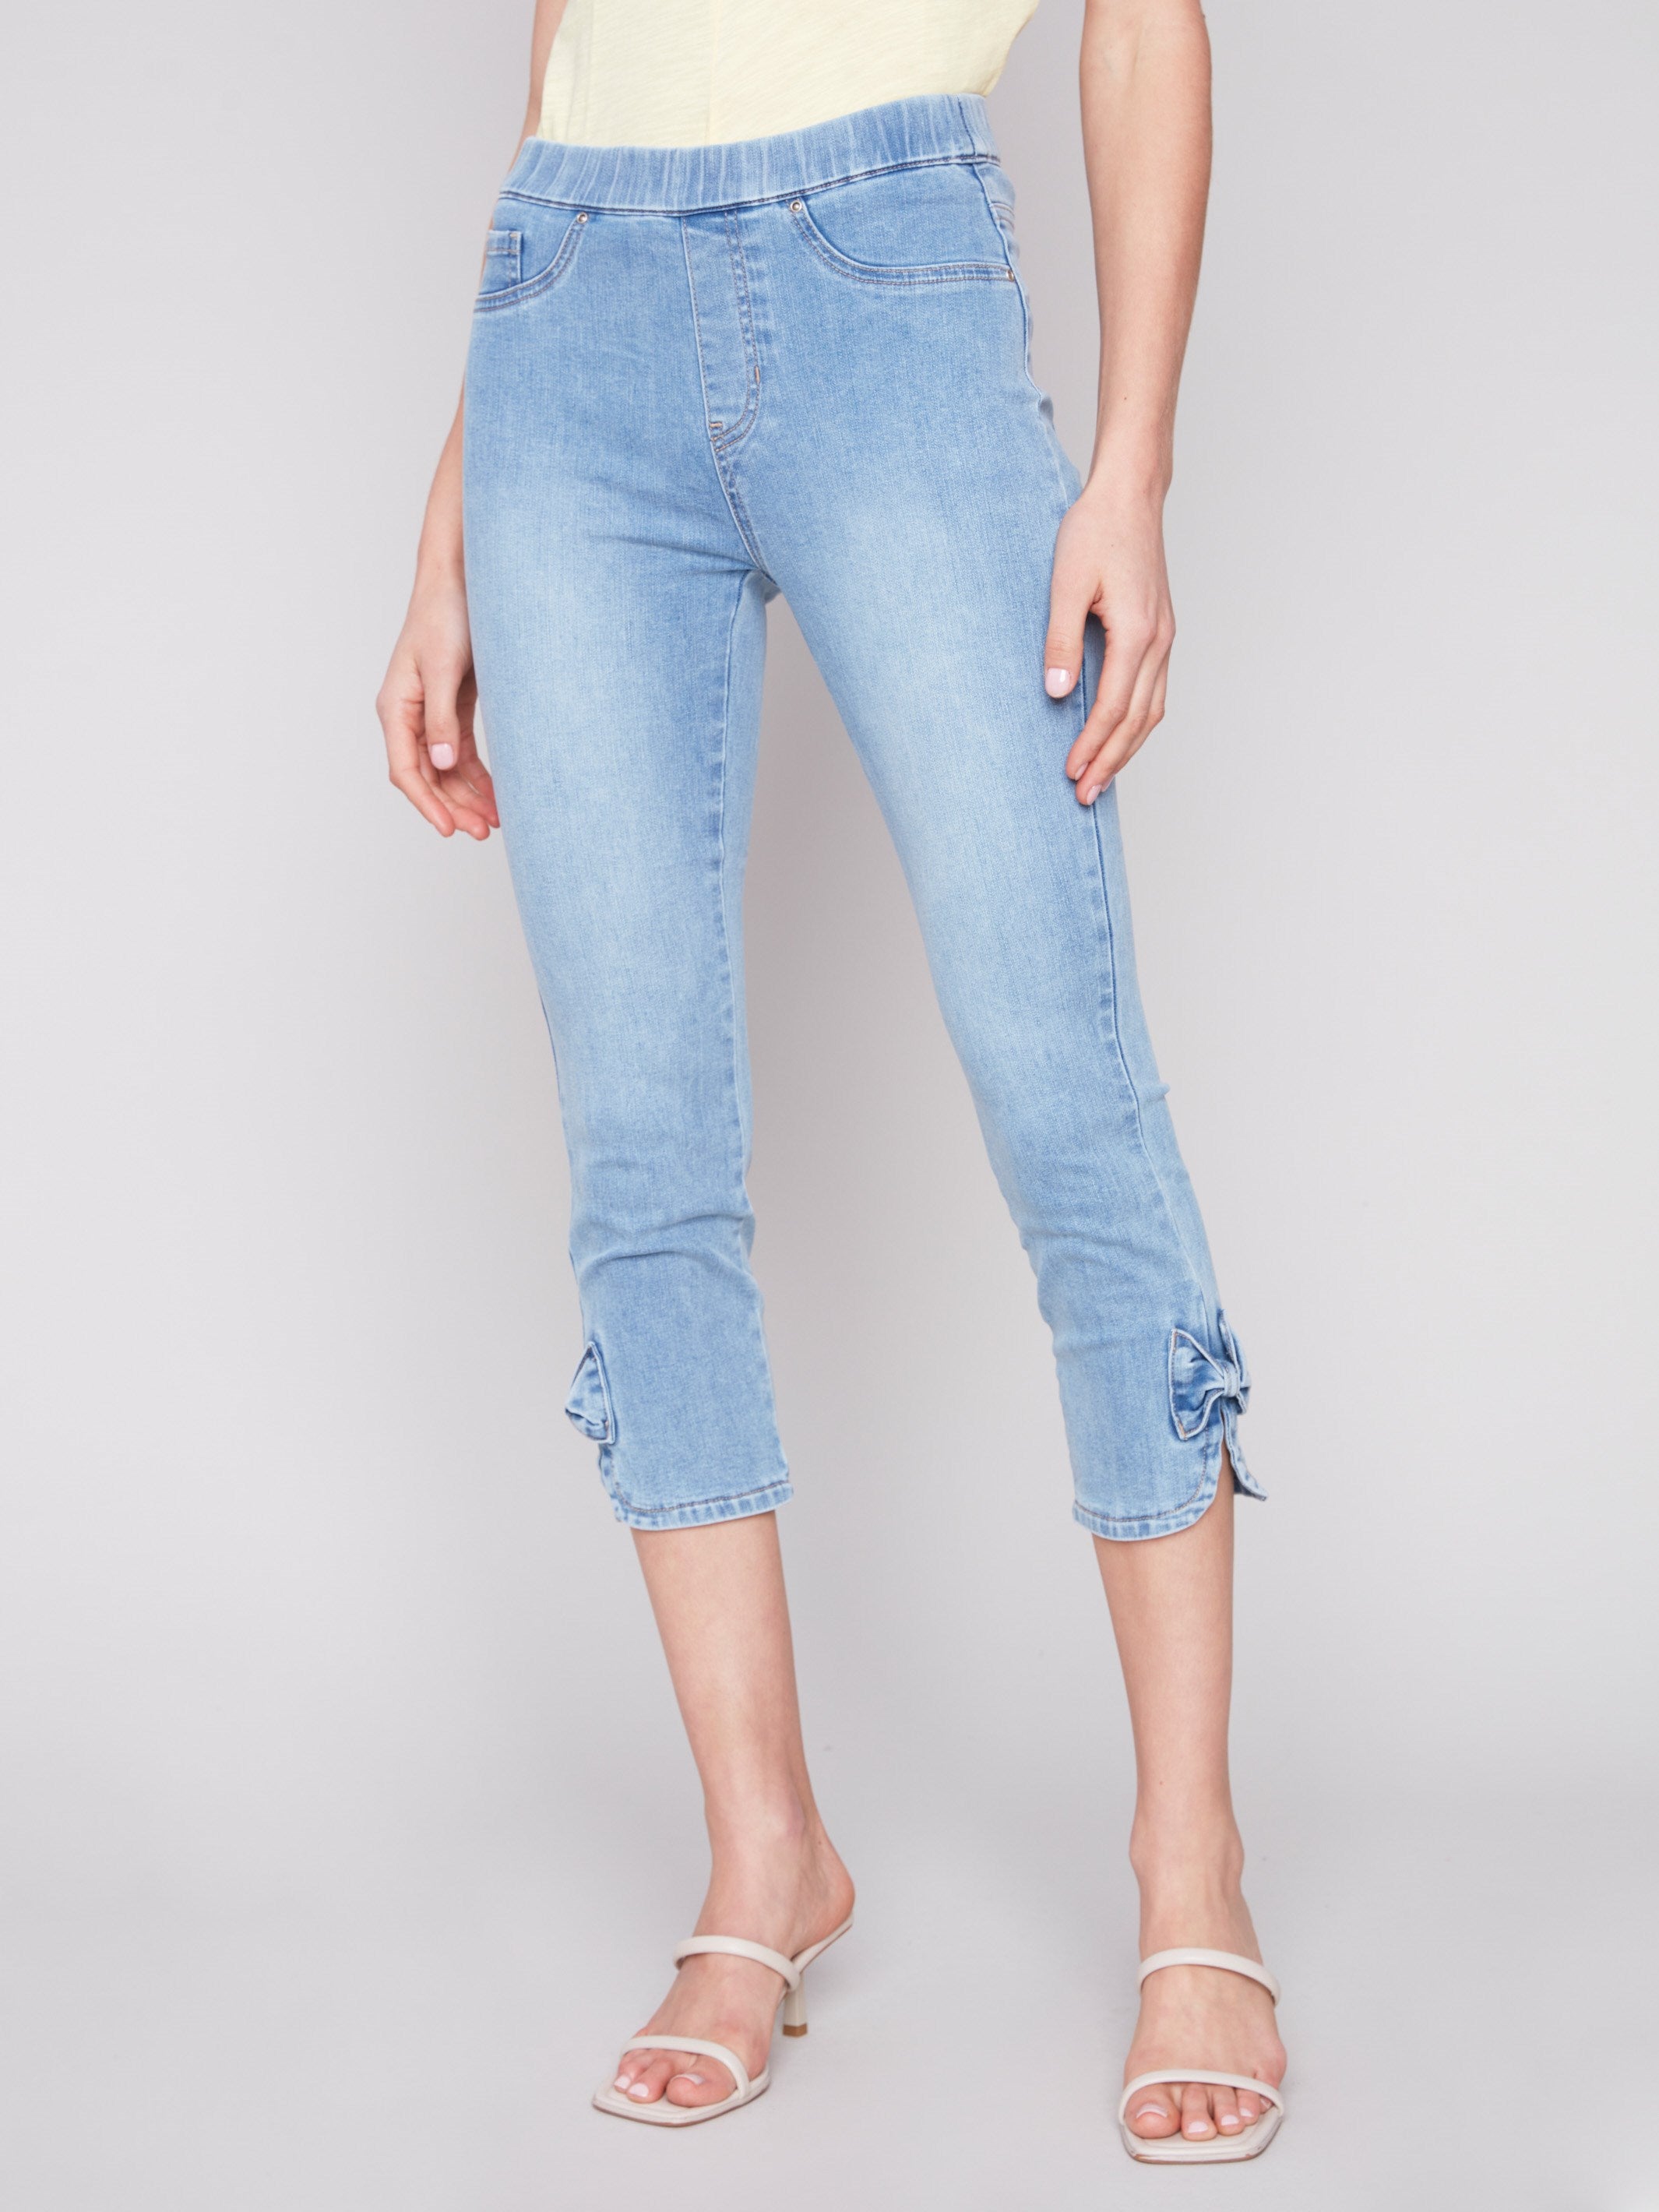 Pull-On Jeans with Bow Detail - Light Blue - Charlie B Collection Canada - Image 2